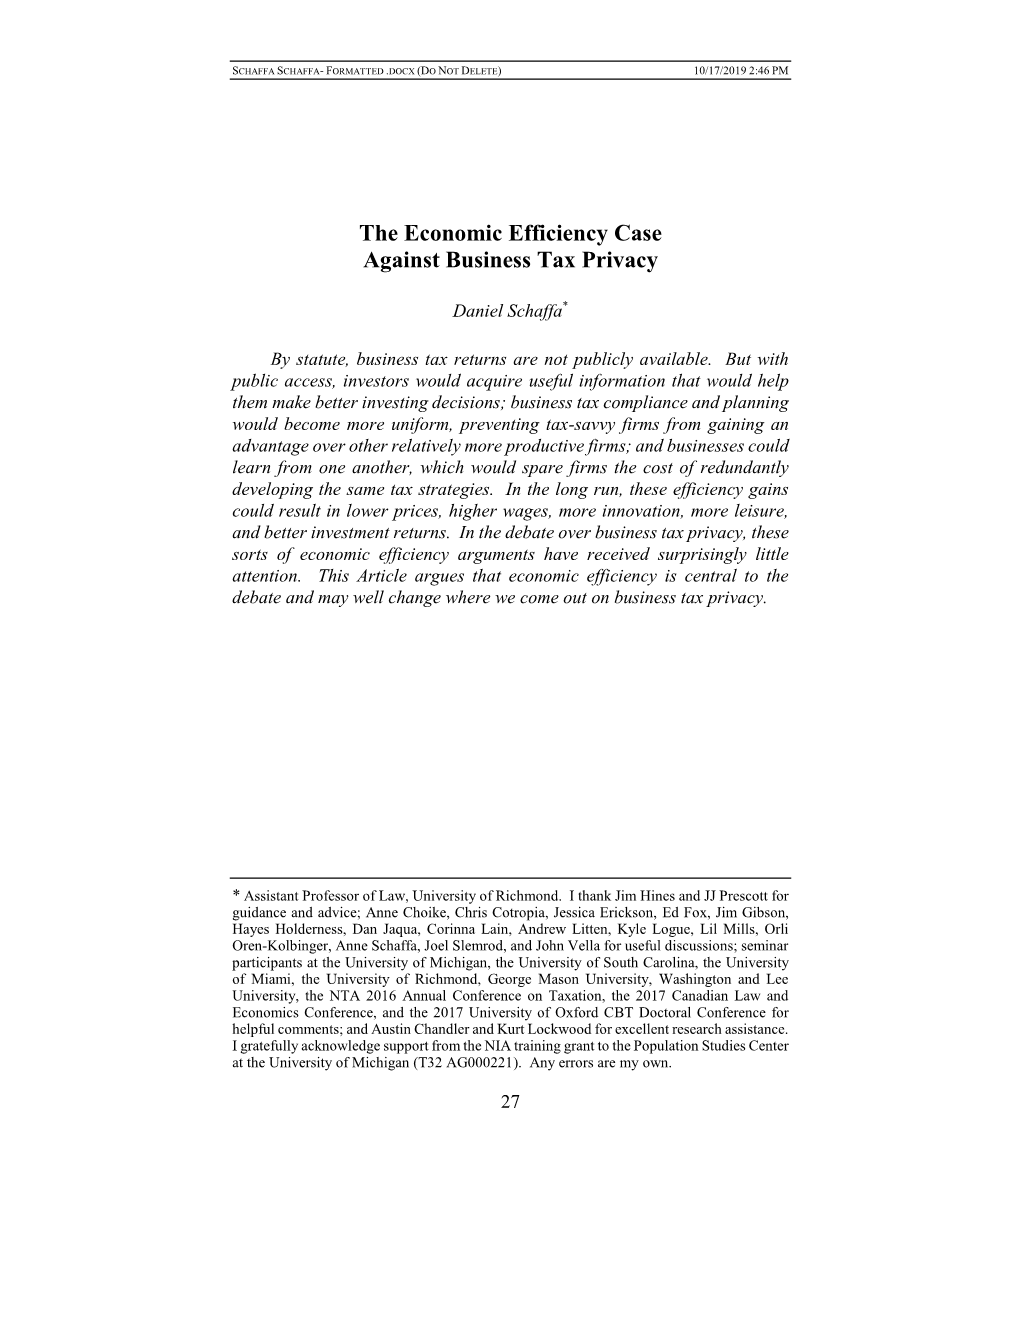 The Economic Efficiency Case Against Business Tax Privacy